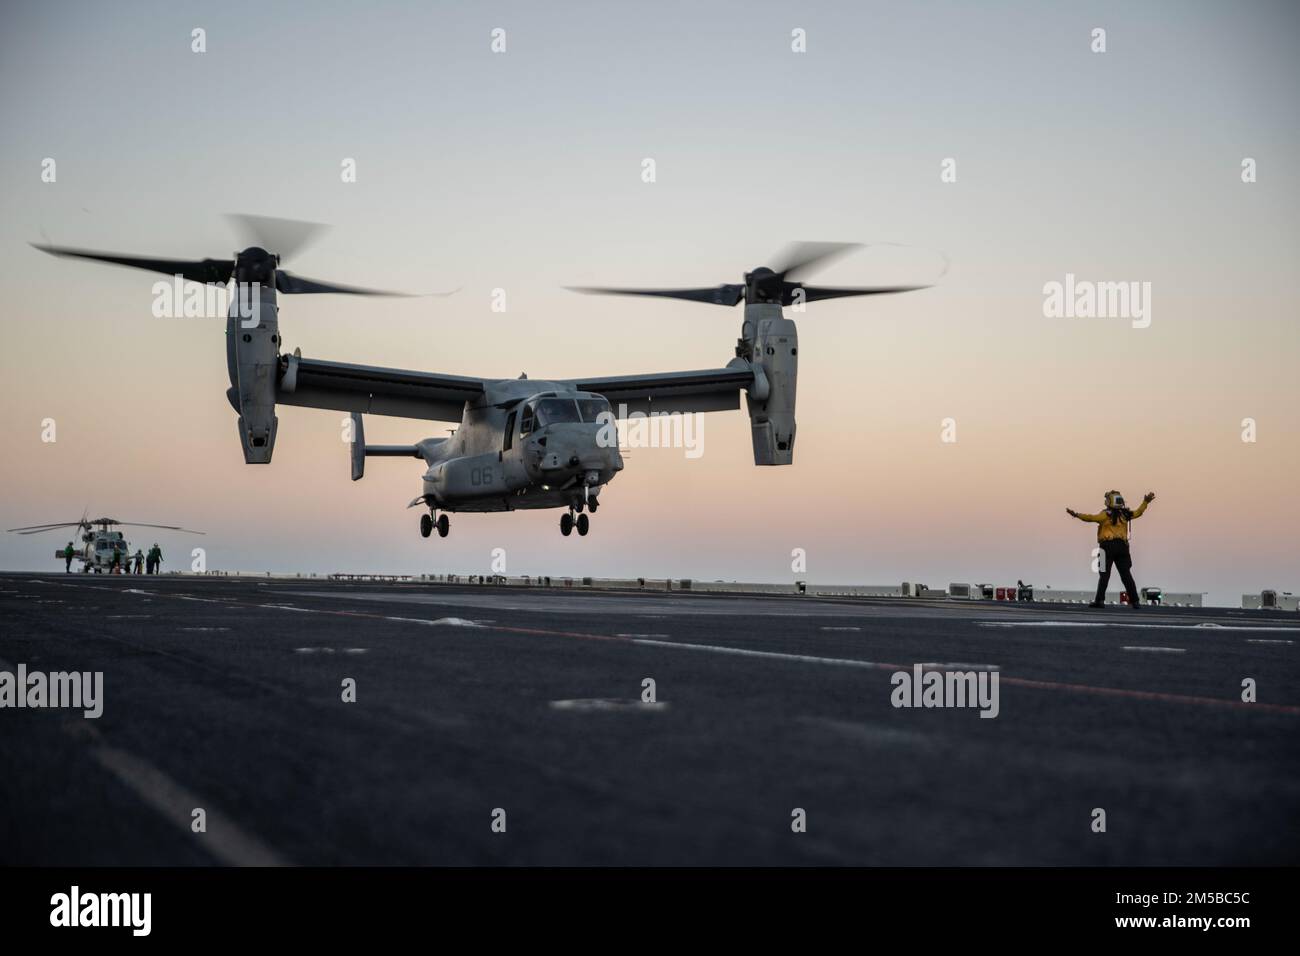 PEARL HARBOR (Feb. 20, 2022) A U.S. Marine Corps MV-22B Osprey attached to Marine Medium Tiltrotor Squadron (VMM) 165 (Reinforced), 11th Marine Expeditionary Unit (MEU), prepares to land aboard Wasp-class amphibious assault ship USS Essex (LHD 2), Feb. 20, 2022. Sailors and Marines of Essex Amphibious Ready Group (ARG) and the 11th MEU are visiting to Joint Base Pearl Harbor-Hickam while operating in U.S. 3rd Fleet. Stock Photo